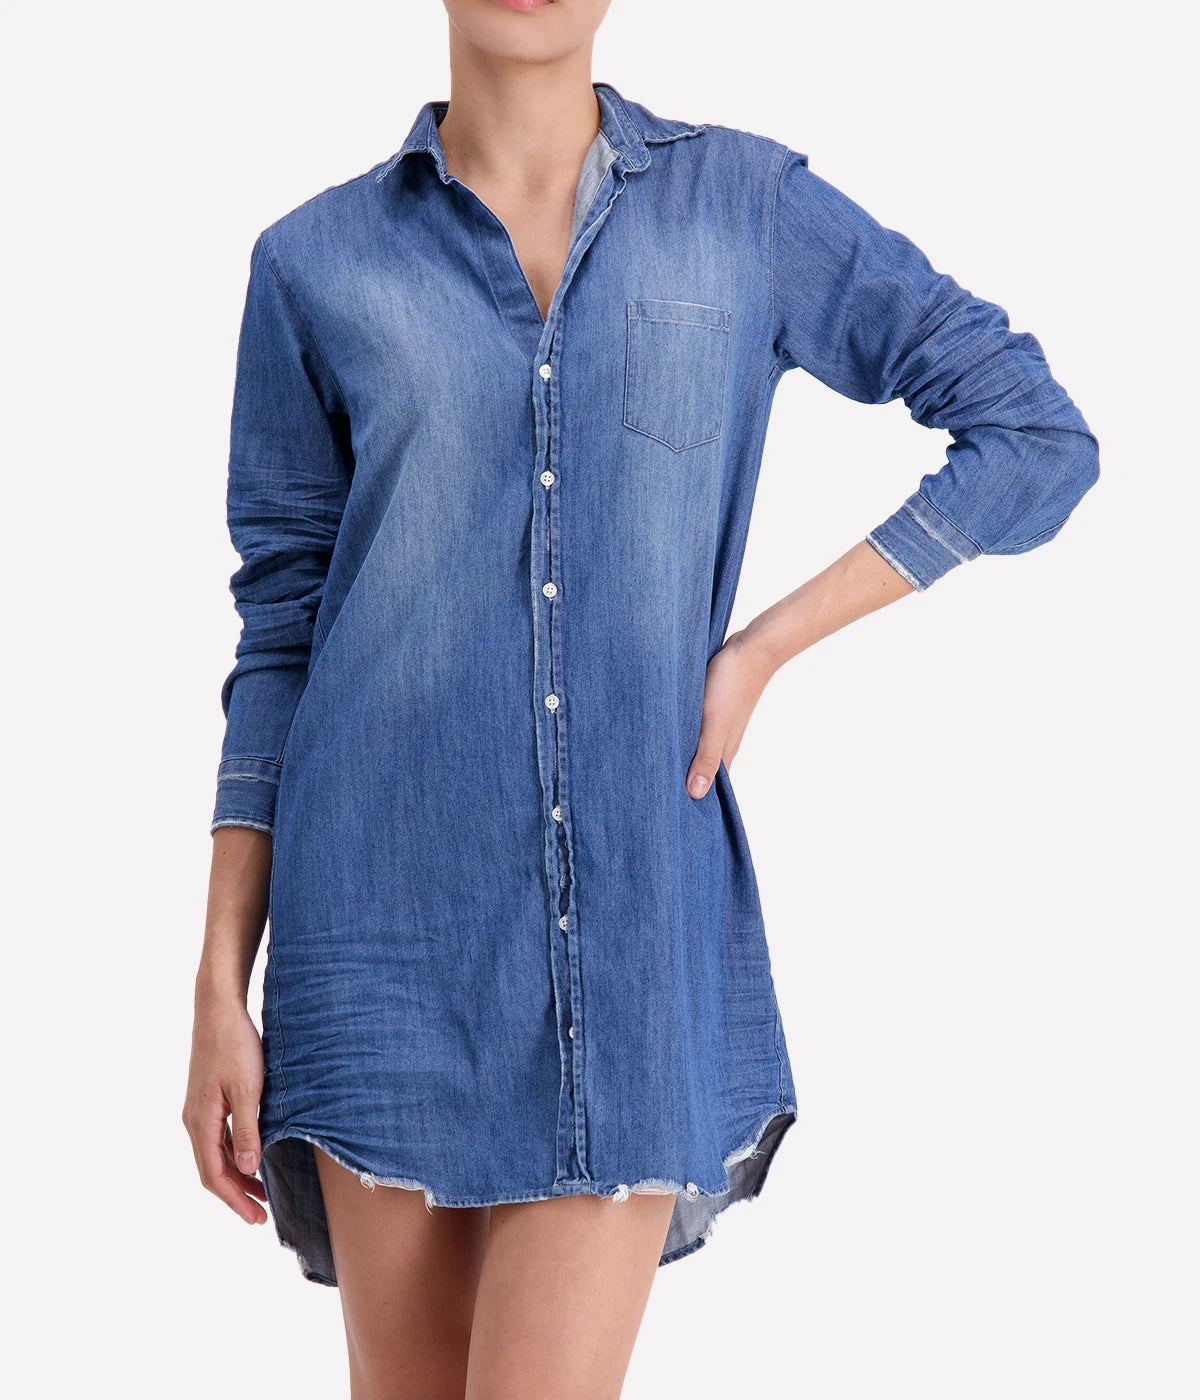 Mary Woven Button Up Dress in Distressed Vintage Wash